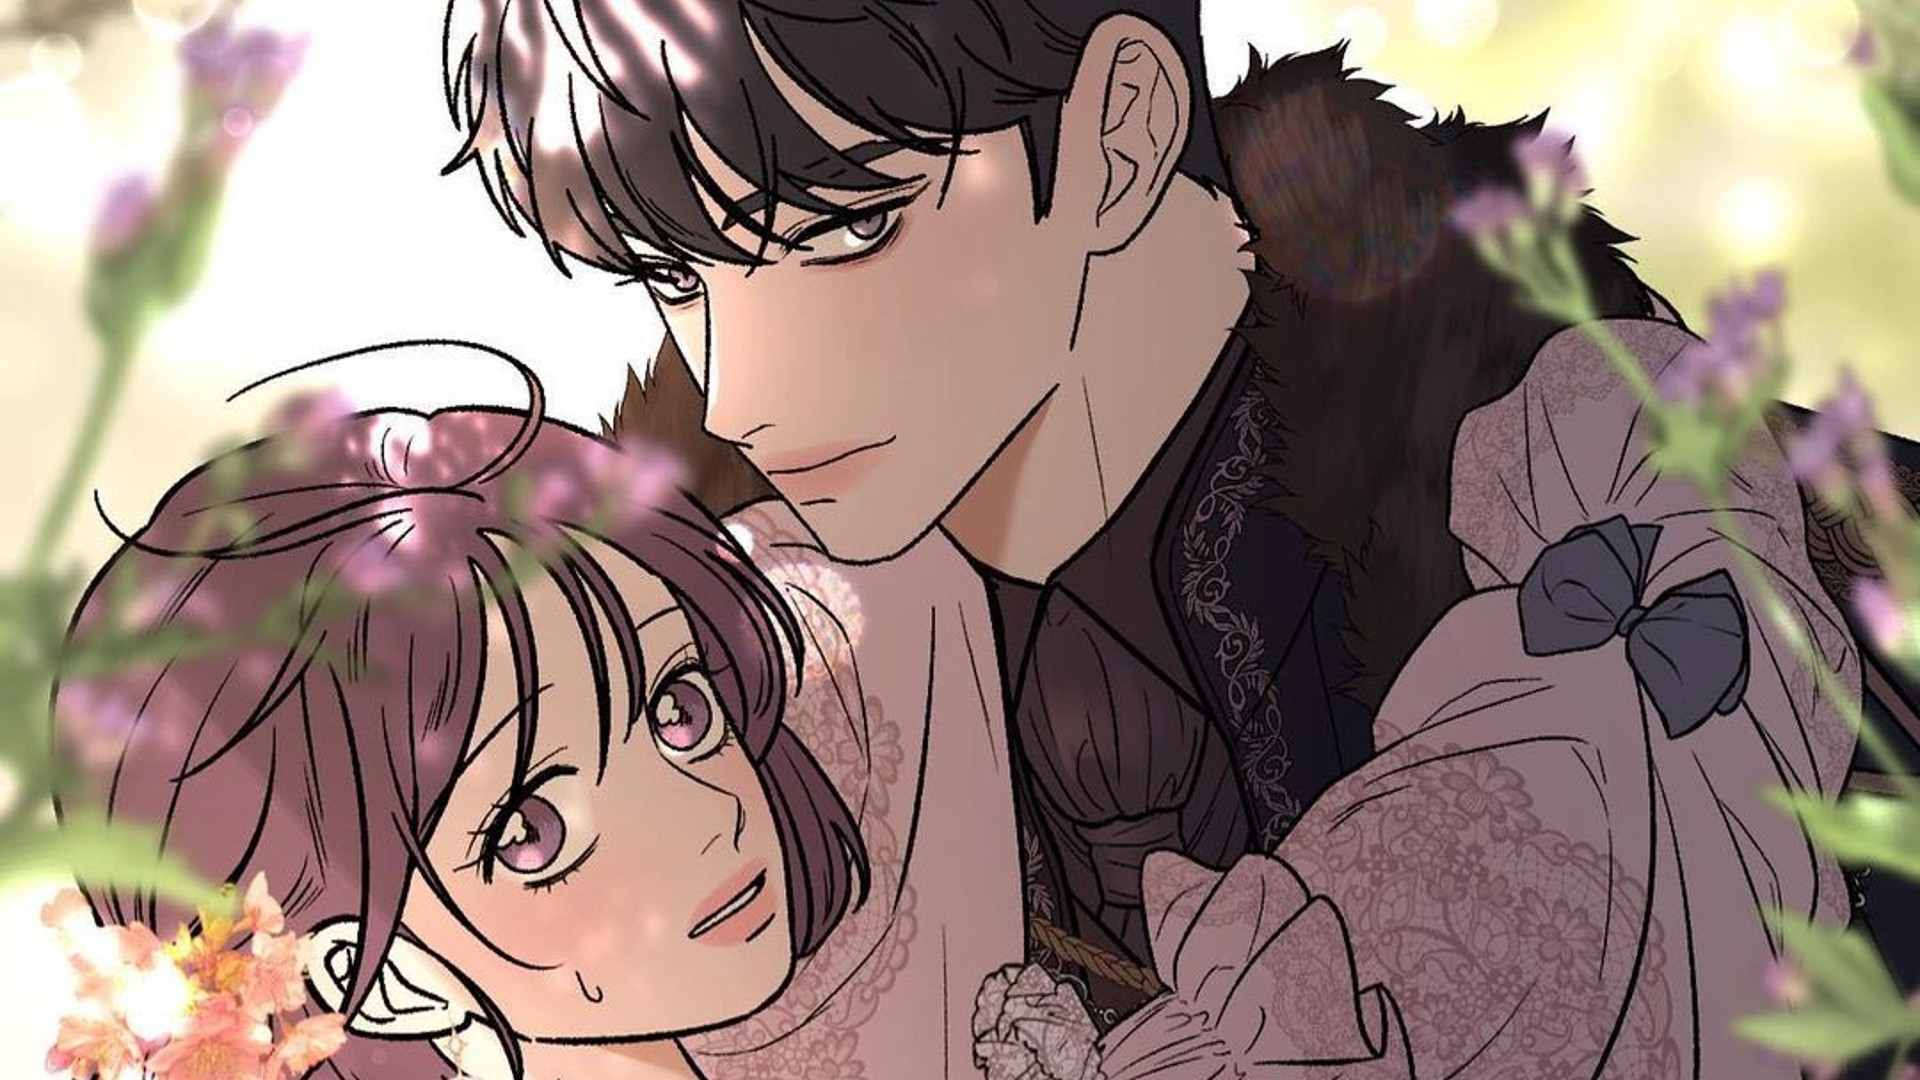 Operation True Love Chapter 70 Release Date and Where To Read